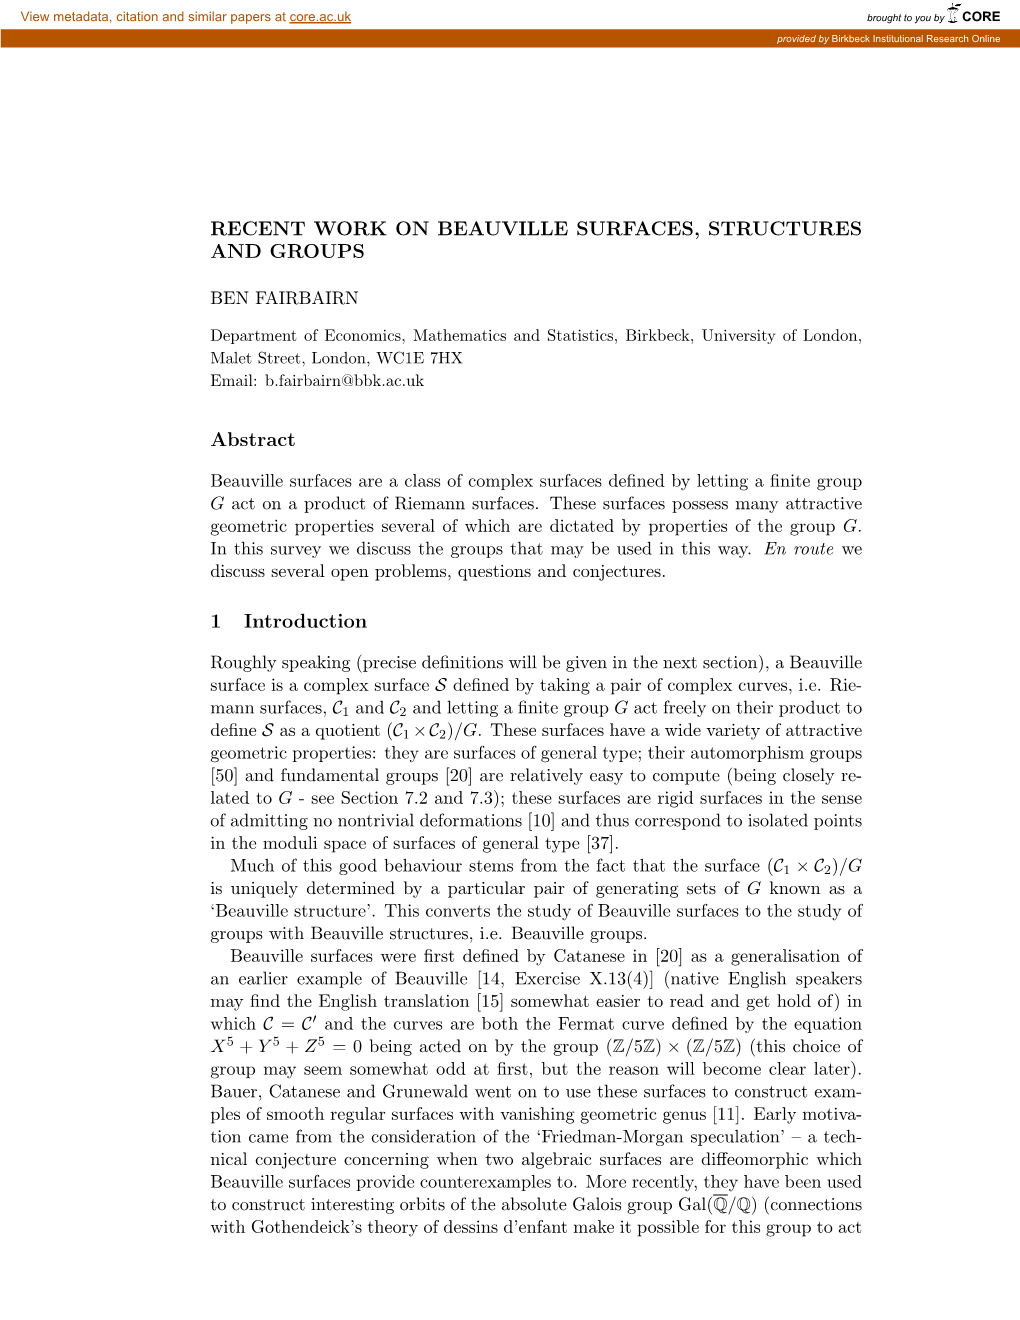 RECENT WORK on BEAUVILLE SURFACES, STRUCTURES and GROUPS Abstract 1 Introduction